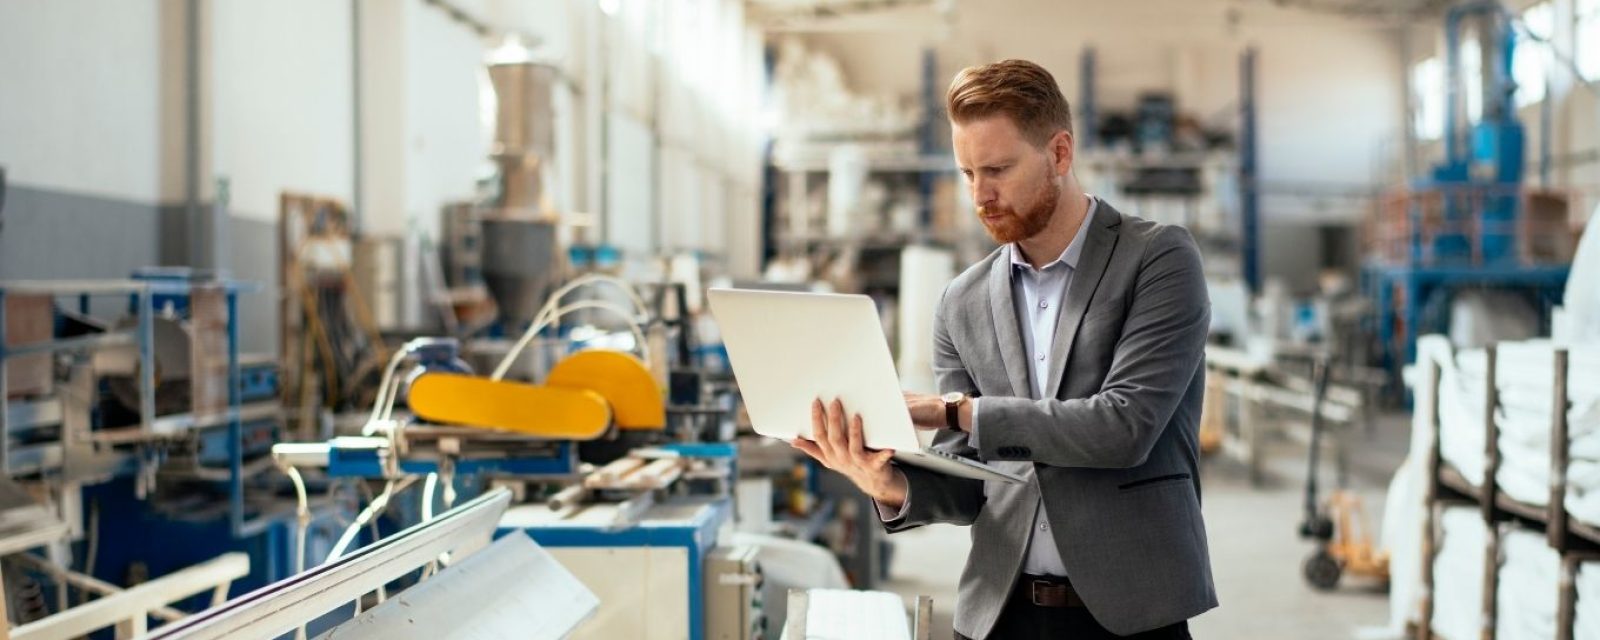 Business man in manufacturing building holding a laptop